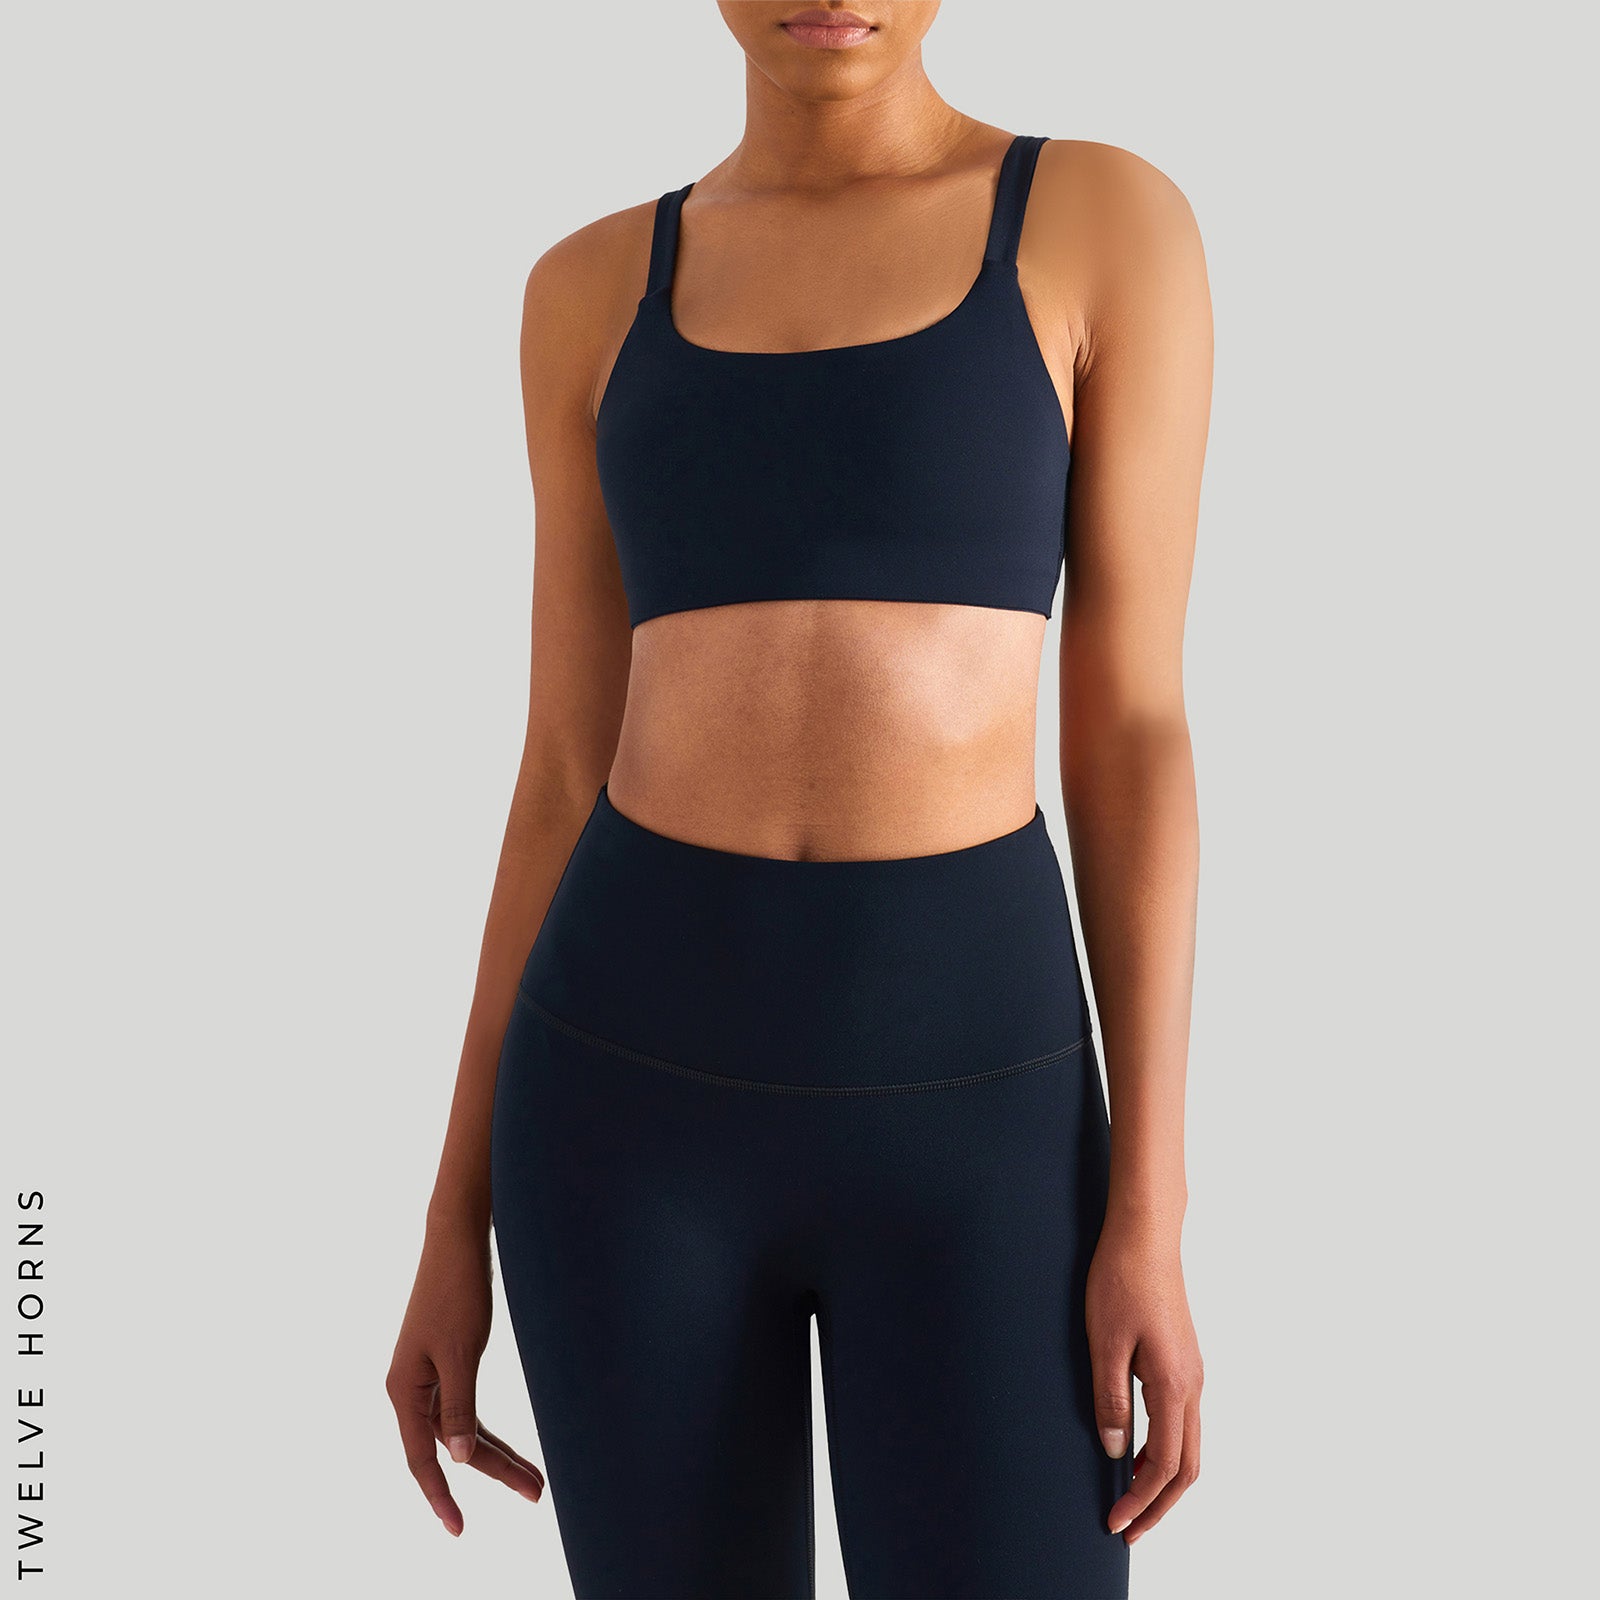 The Ultimate Sports Bra for Yoga, Pilates, and More